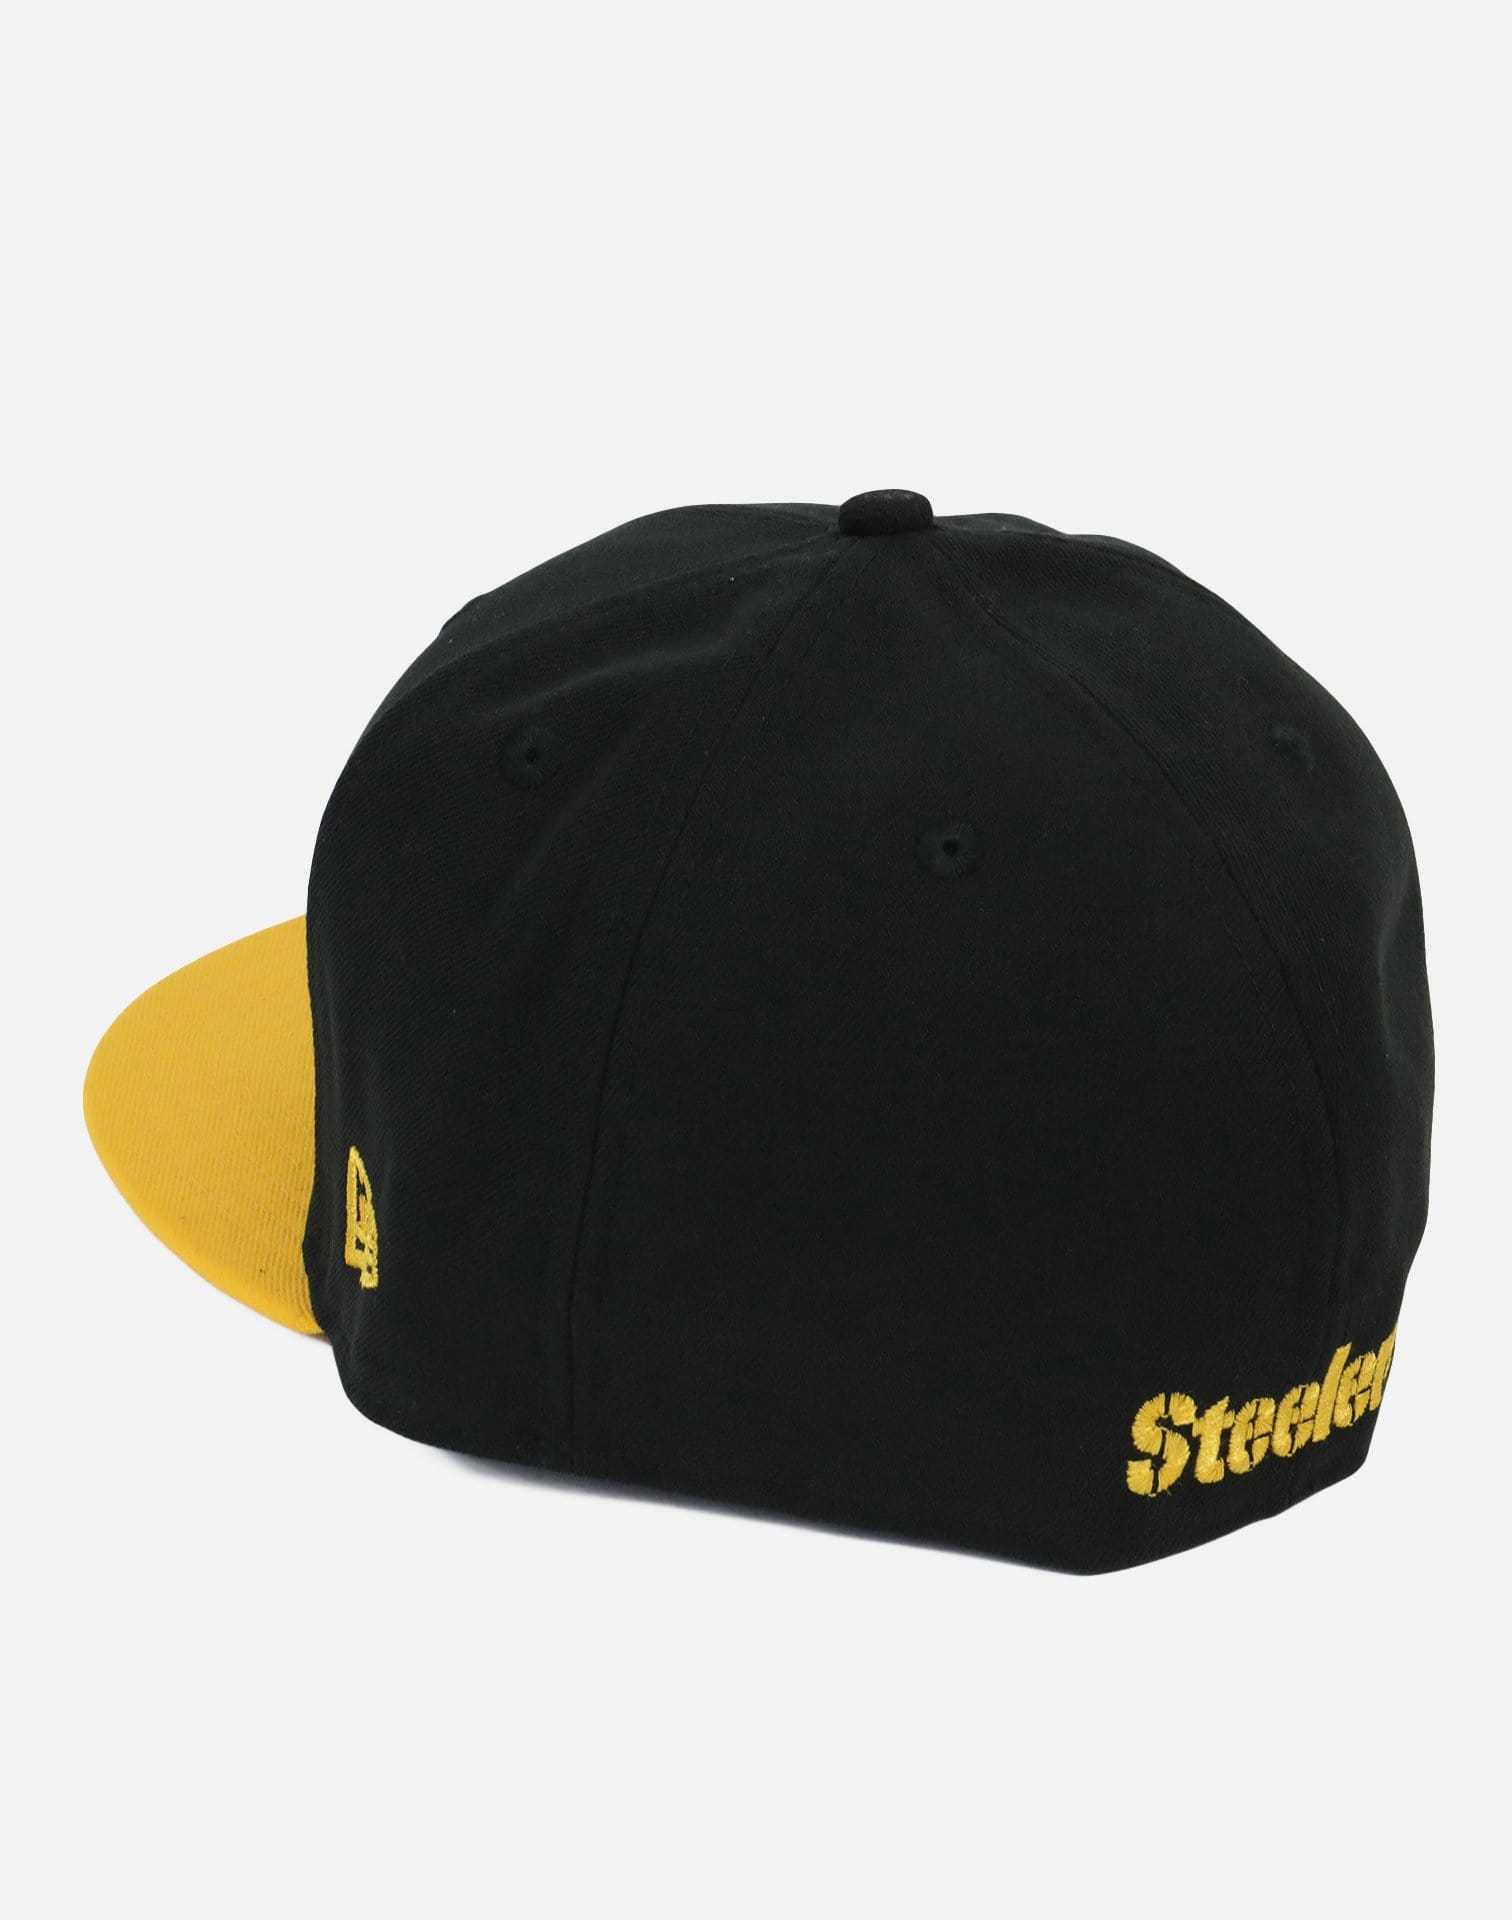 New Era Pittsburgh Steelers Authentic Fitted Hat (Black/Yellow)